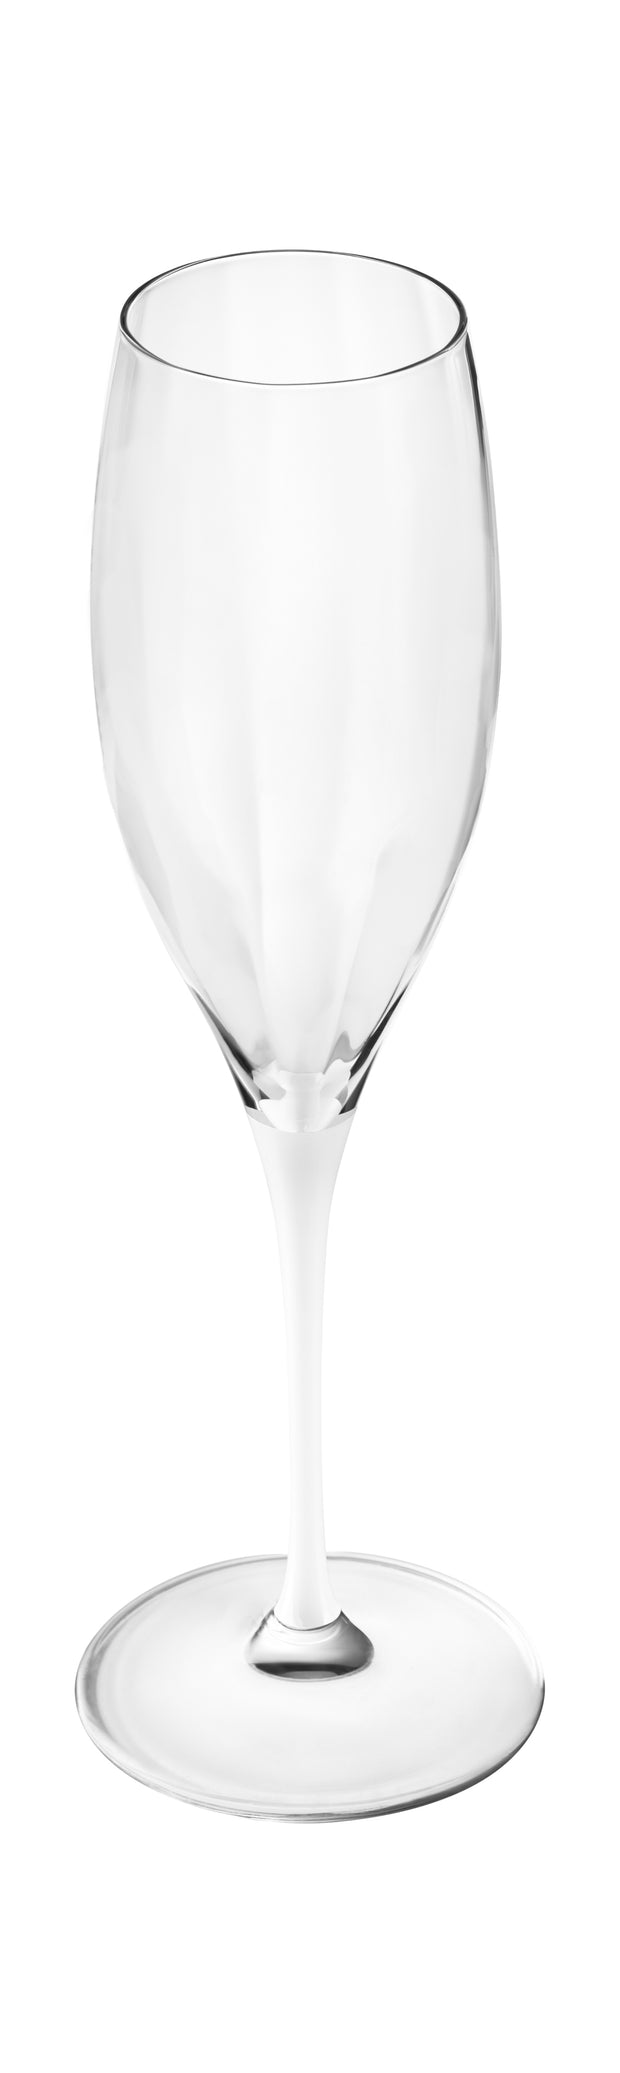 Spectrum Champagne Flute with White Stem, 11 oz. Set of 6